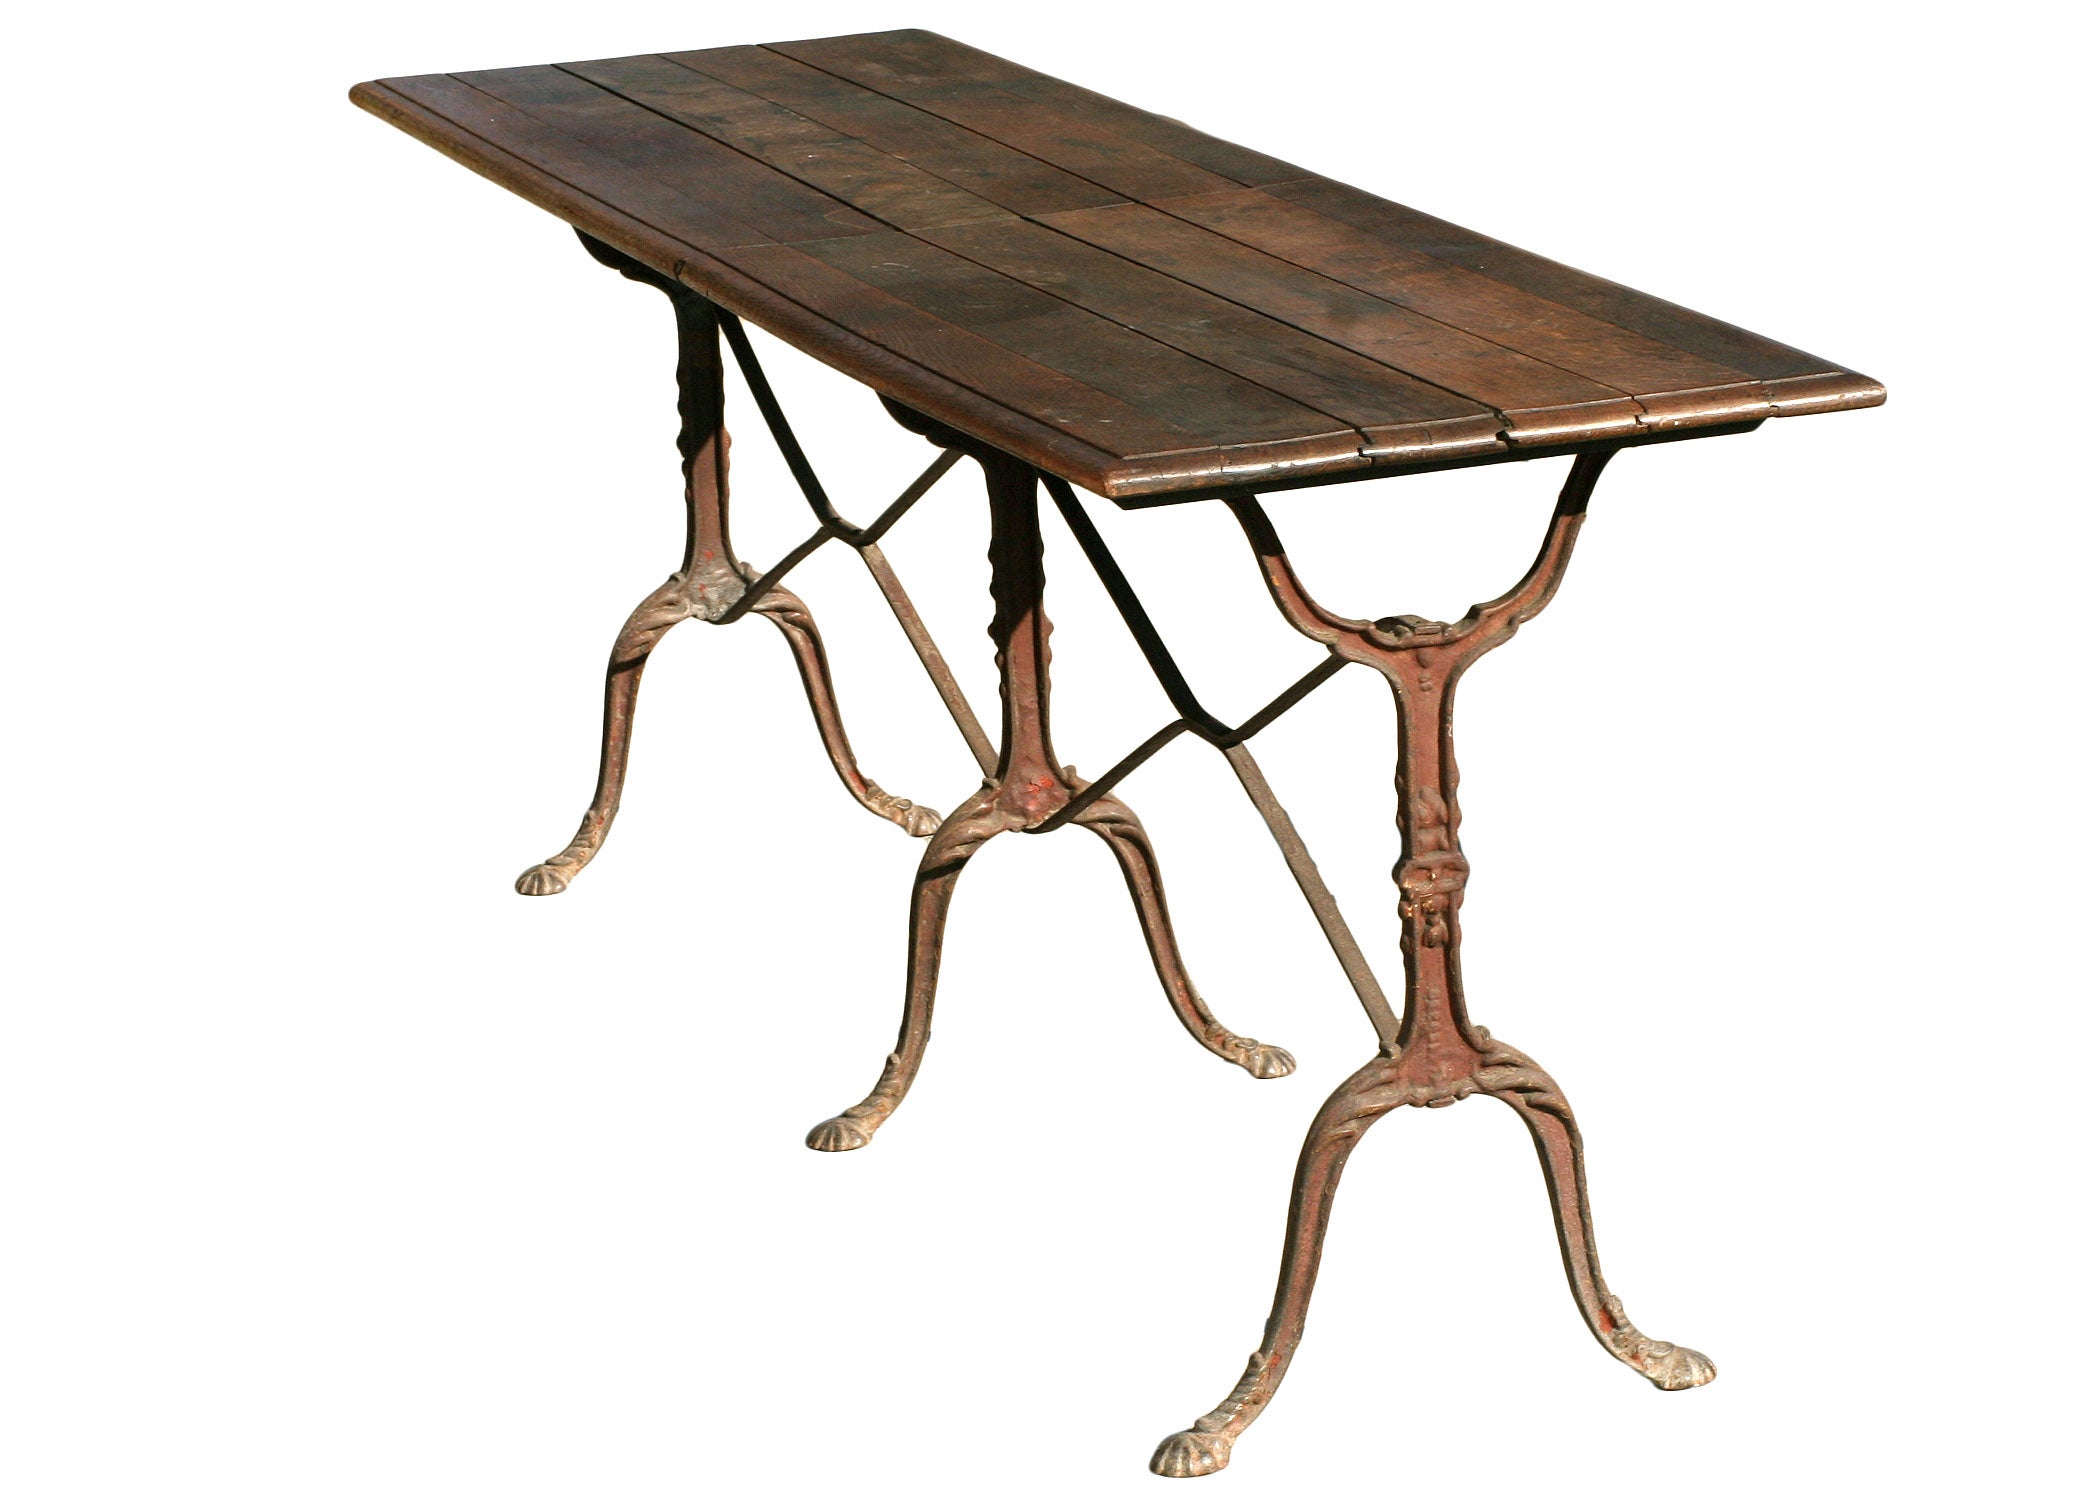 Late 19th Century French Country "Baker's" Table